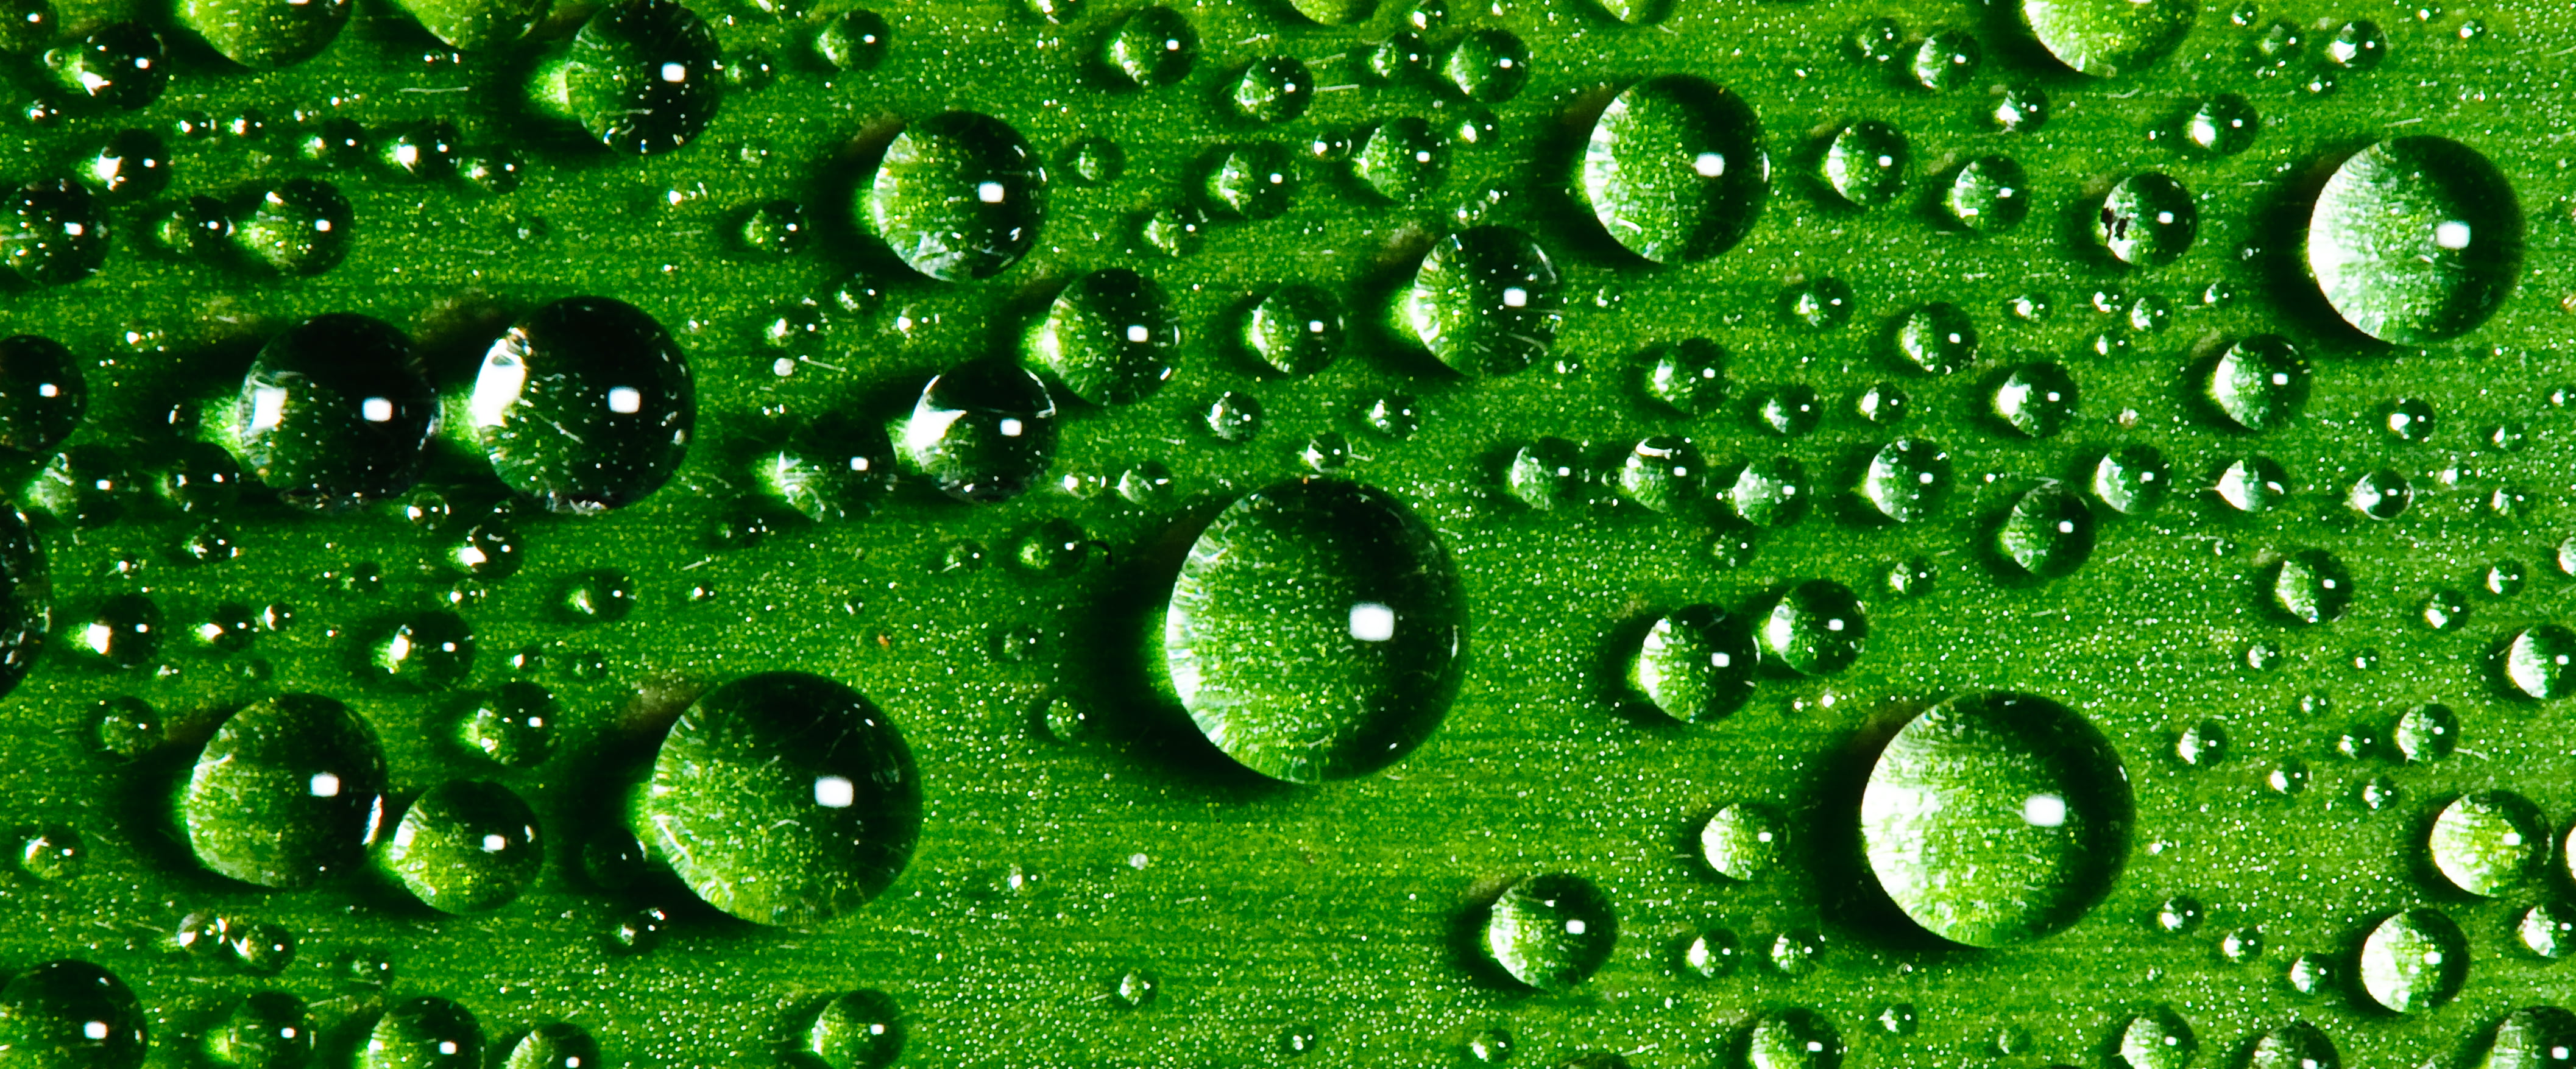 green leaf with water dew, Drops, Explored, 105mm, d300, foliage